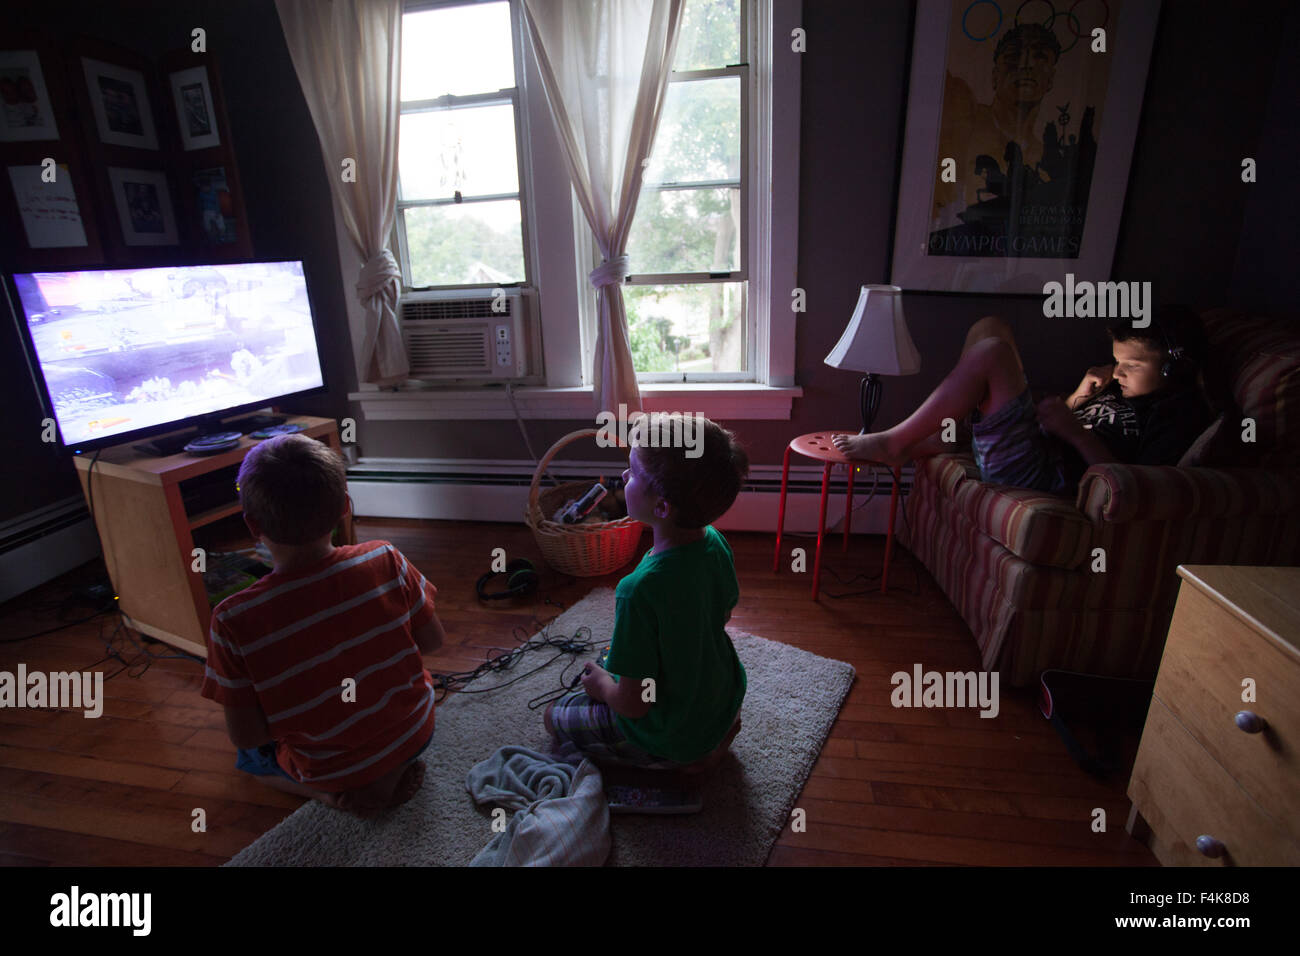 Three Young Brothers Play Video Games In Their Suburban Bedroom